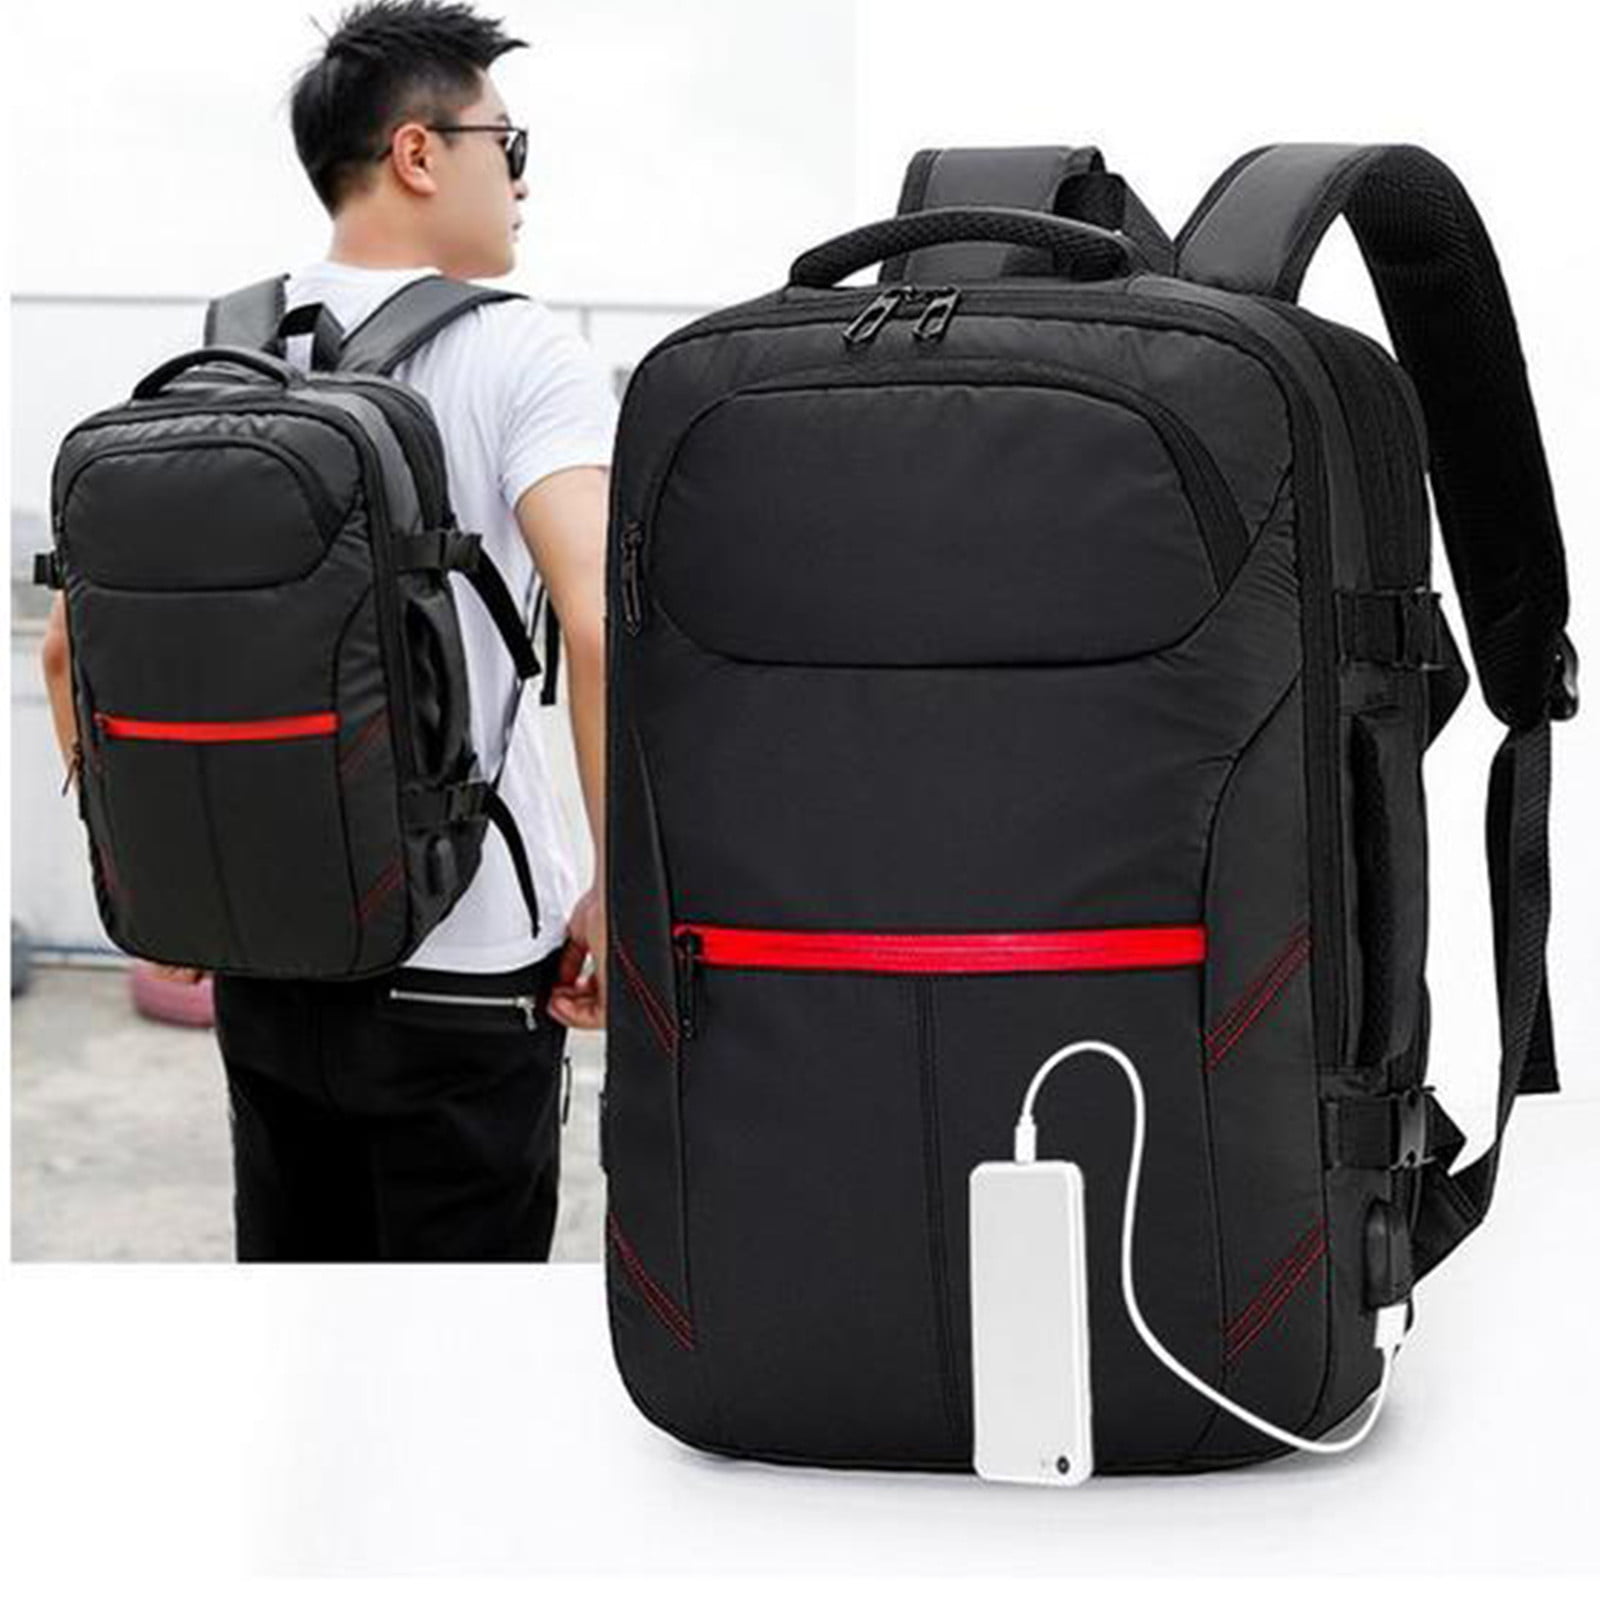 Oxford Men's Backpack Outdoor Travel Camp Multifunction Large Capacity Bag Gifts 